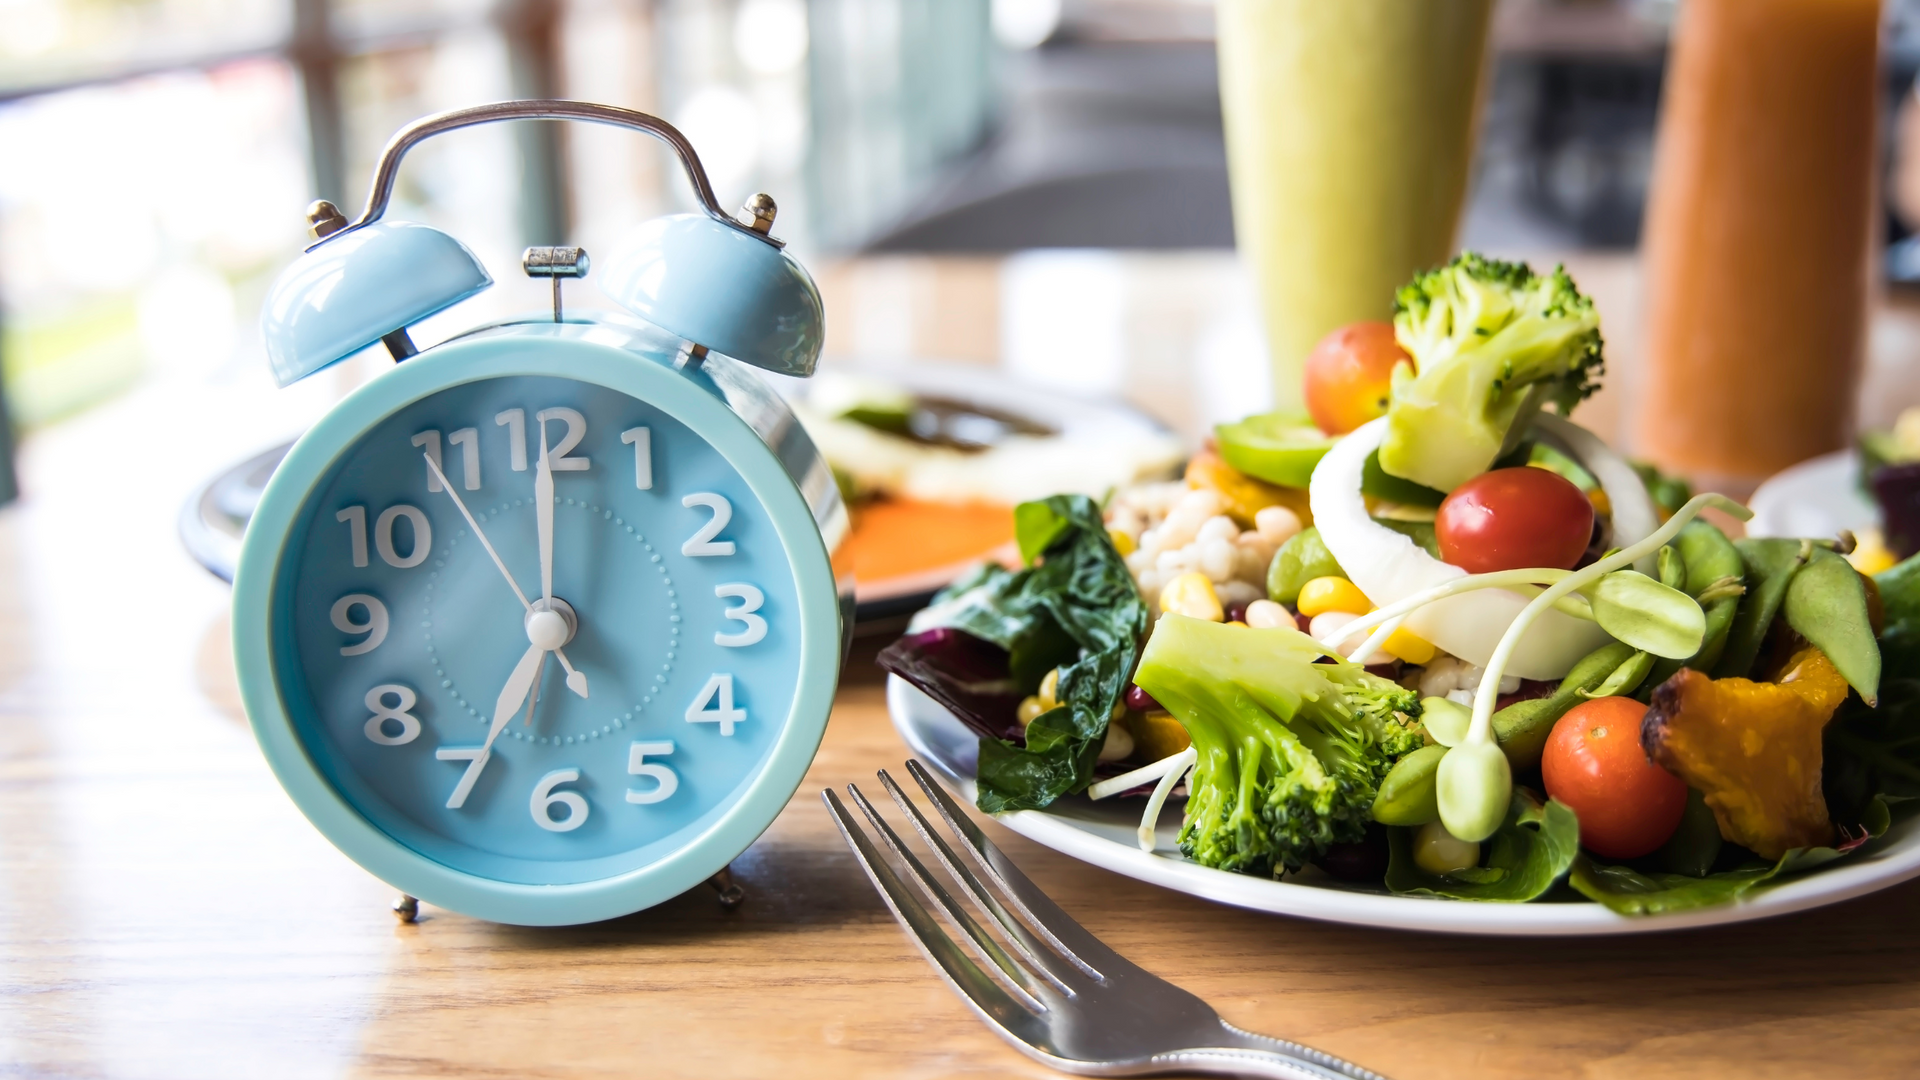 A baby blue clock on the left and a healthy salad on the right with smoothies in the background.